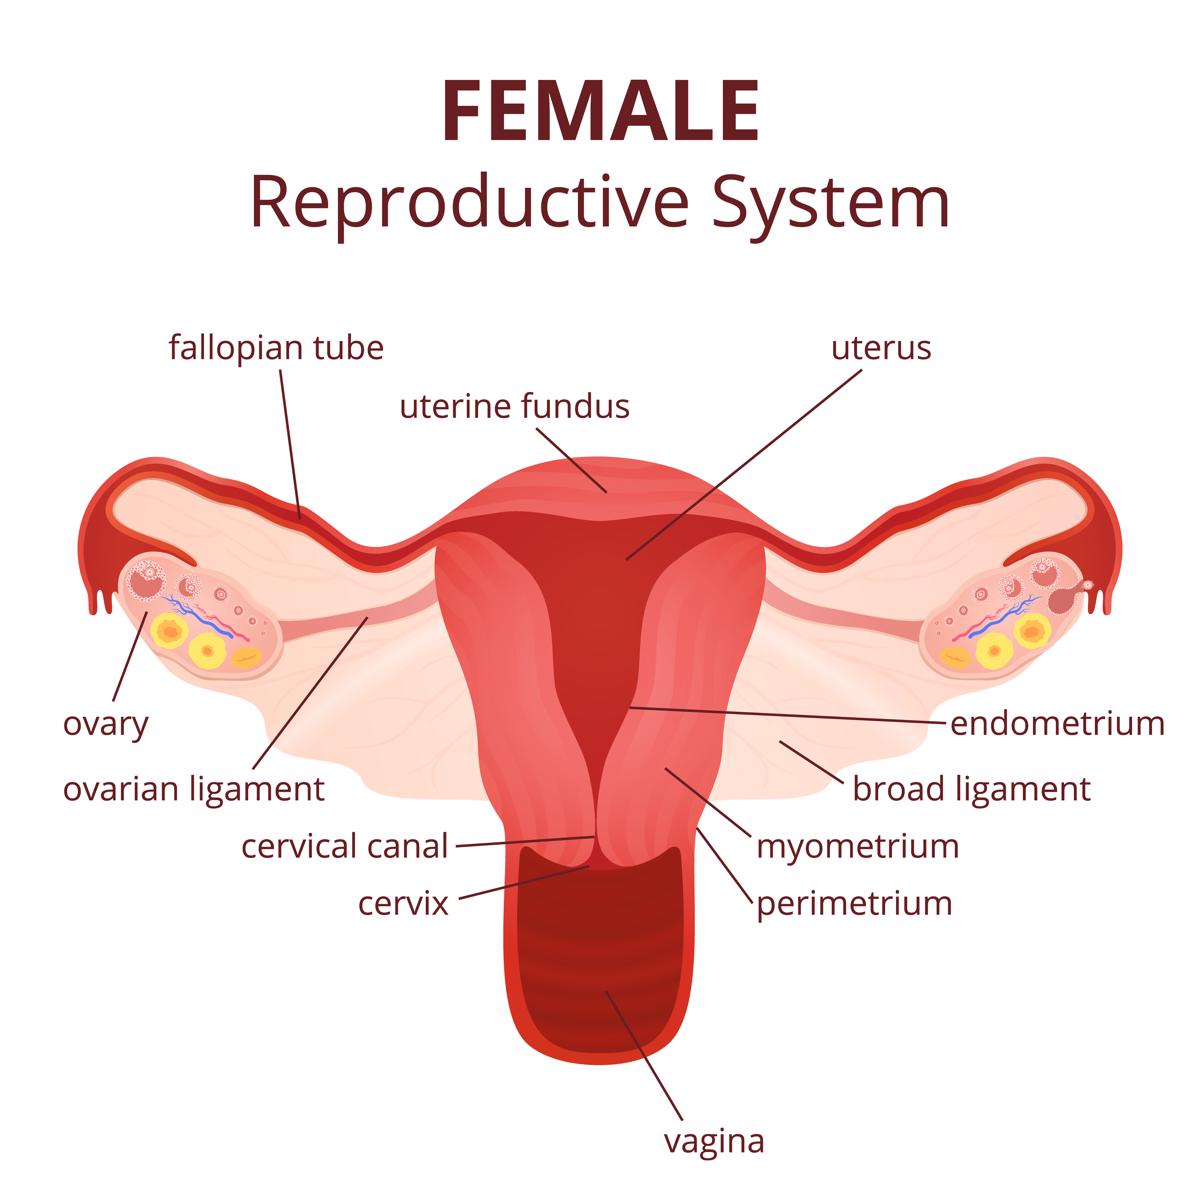 Labeled Diagram of the Female Reproductive System And Its Functioning